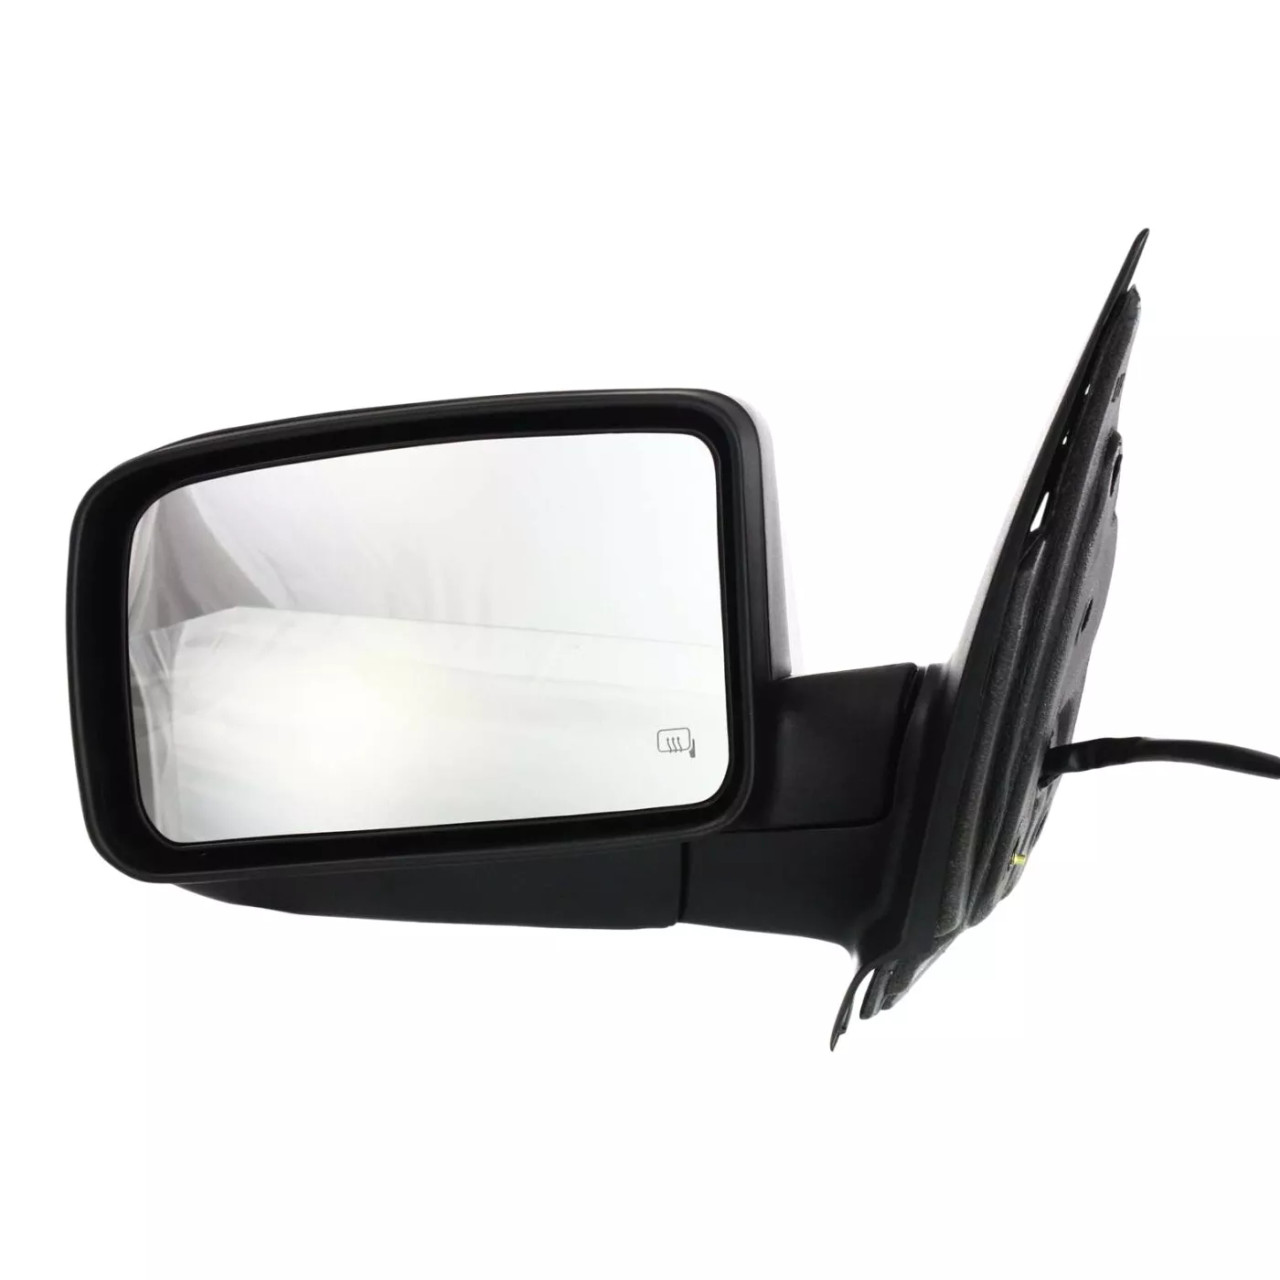 Power Mirror For 2003 Ford Expedition Manual Folding With Puddle Light 2Pc